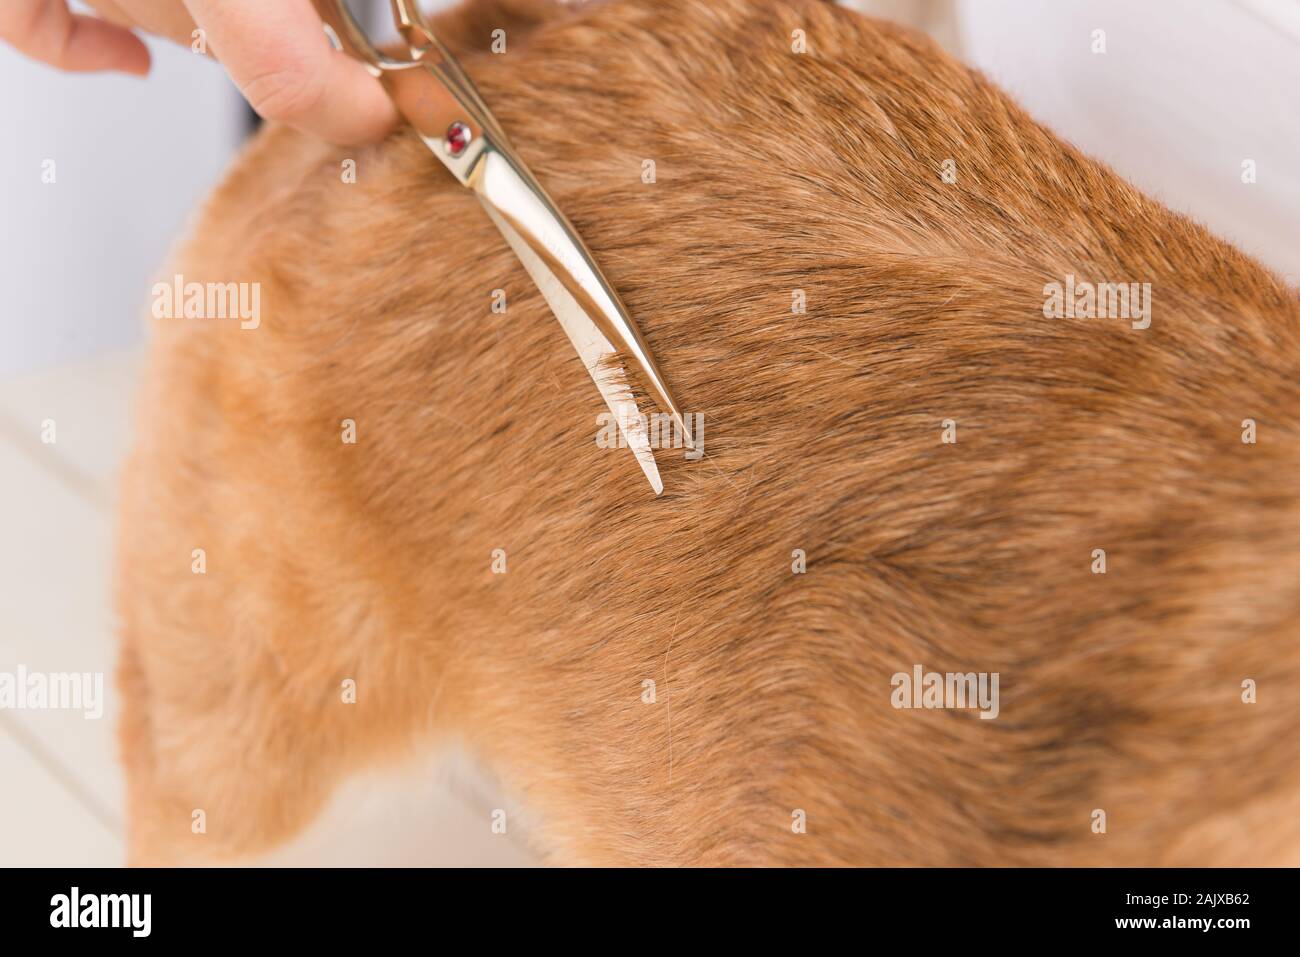 Female groomer use scissors to cut the dog's hair on table Stock Photo